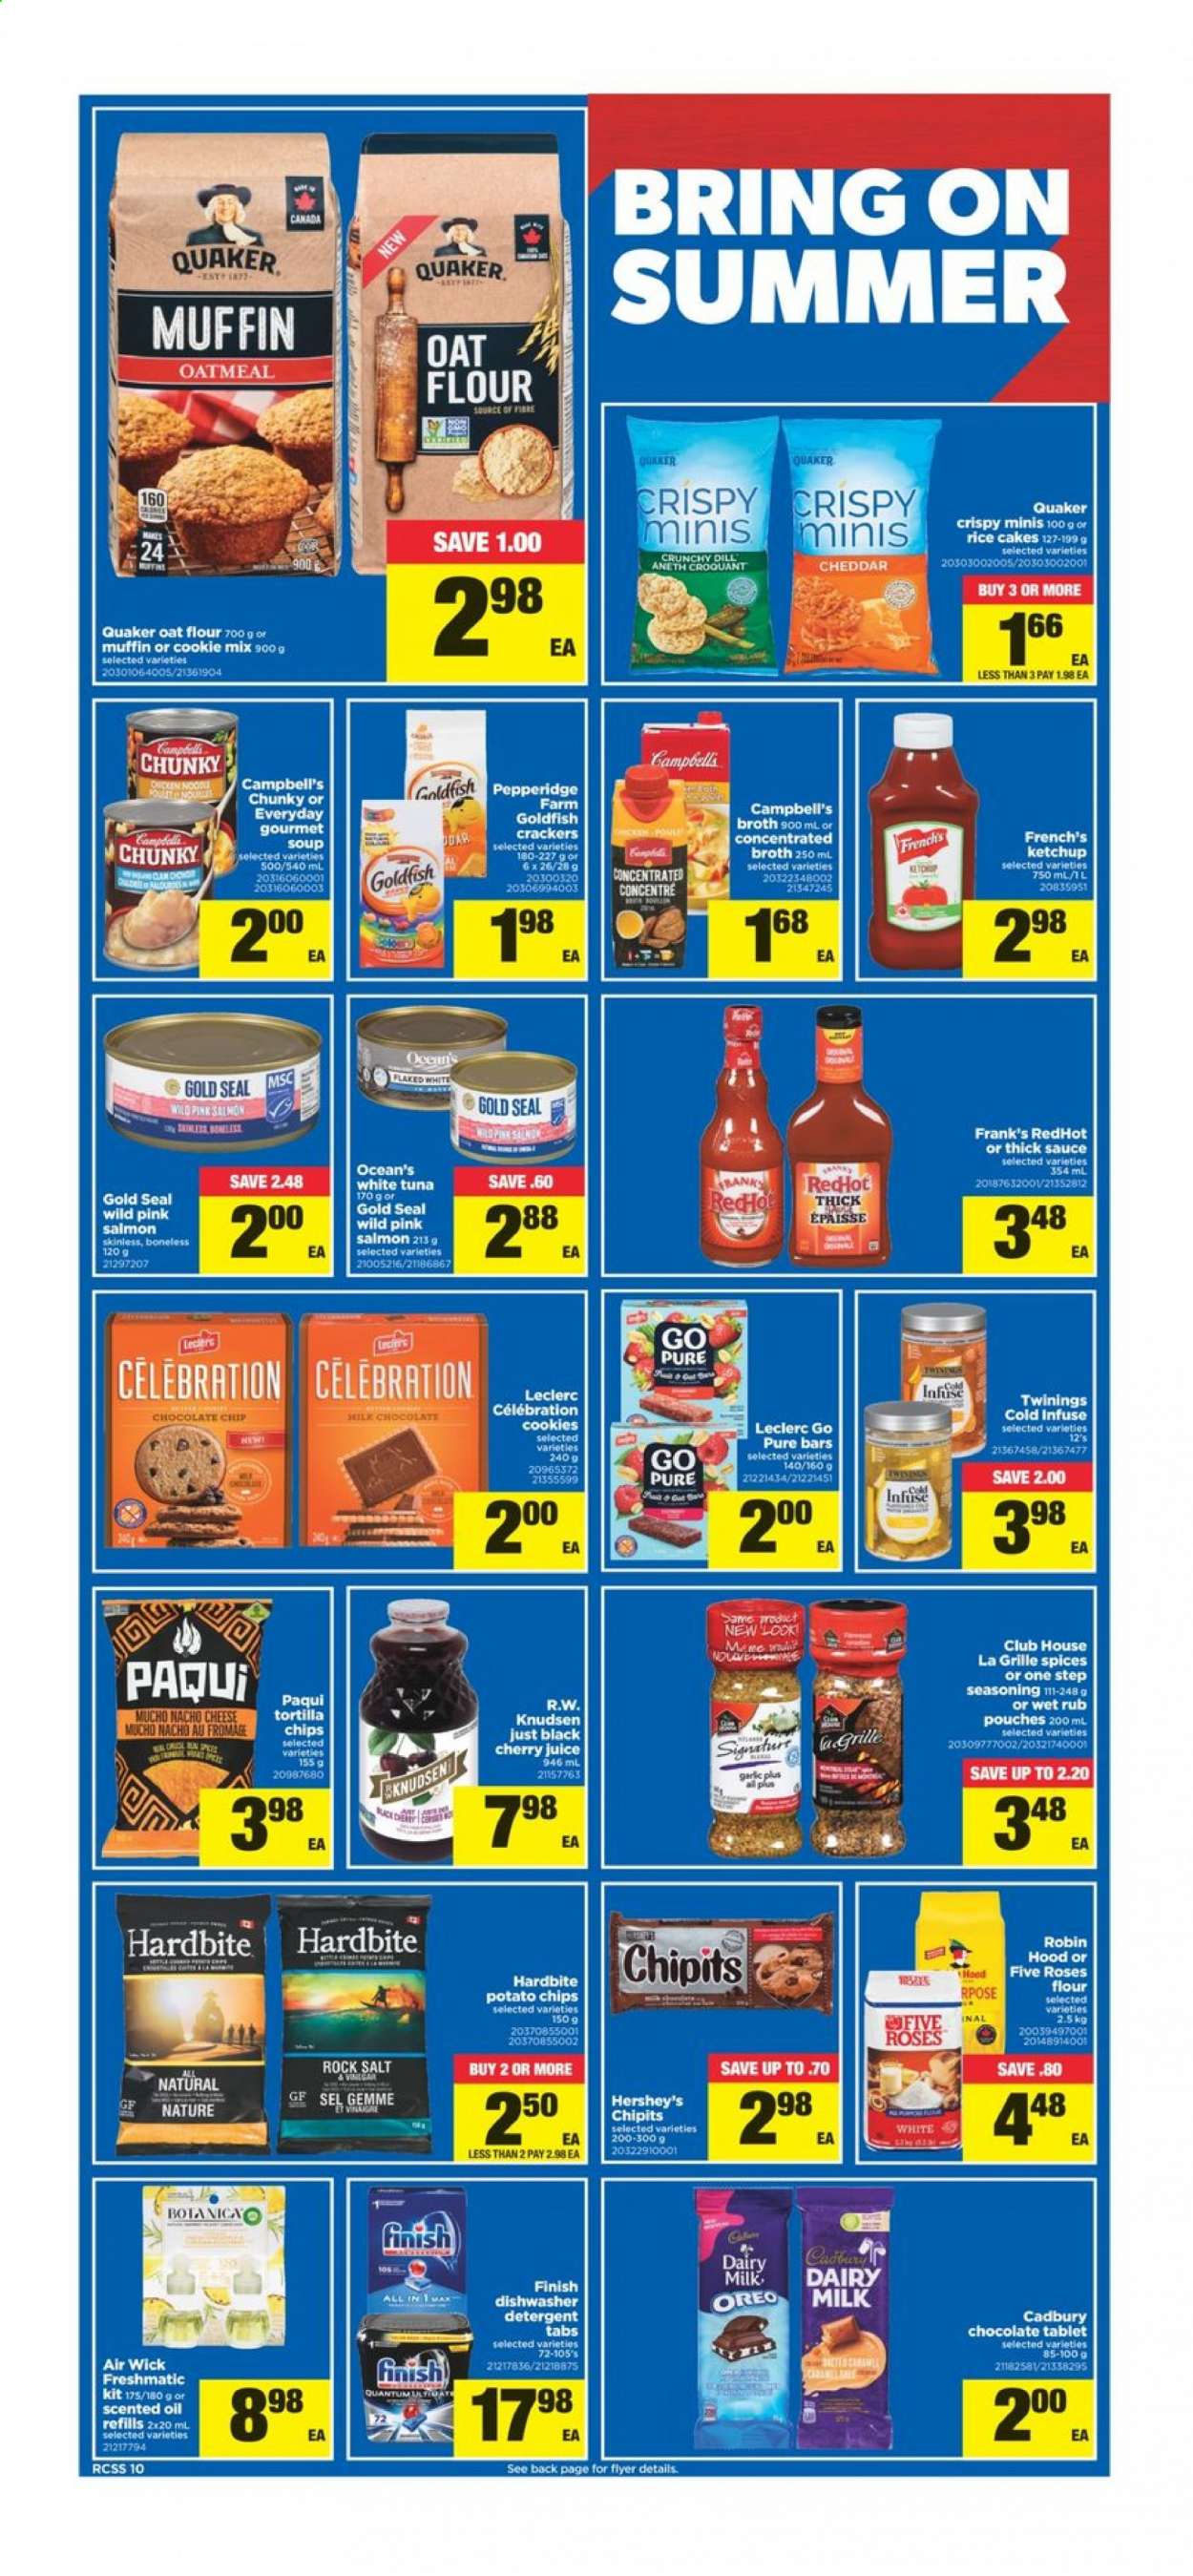 thumbnail - Real Canadian Superstore Flyer - July 15, 2021 - July 21, 2021 - Sales products - tablet, tortillas, Ace, cherries, salmon, tuna, Campbell's, sauce, Quaker, cheese, Hershey's, Celebration, crackers, Cadbury, Dairy Milk, potato chips, Goldfish, oatmeal, oats, salt, broth, dill, spice, oil, cherry juice, juice, Twinings, Air Wick, scented oil, Oreo, chips. Page 10.